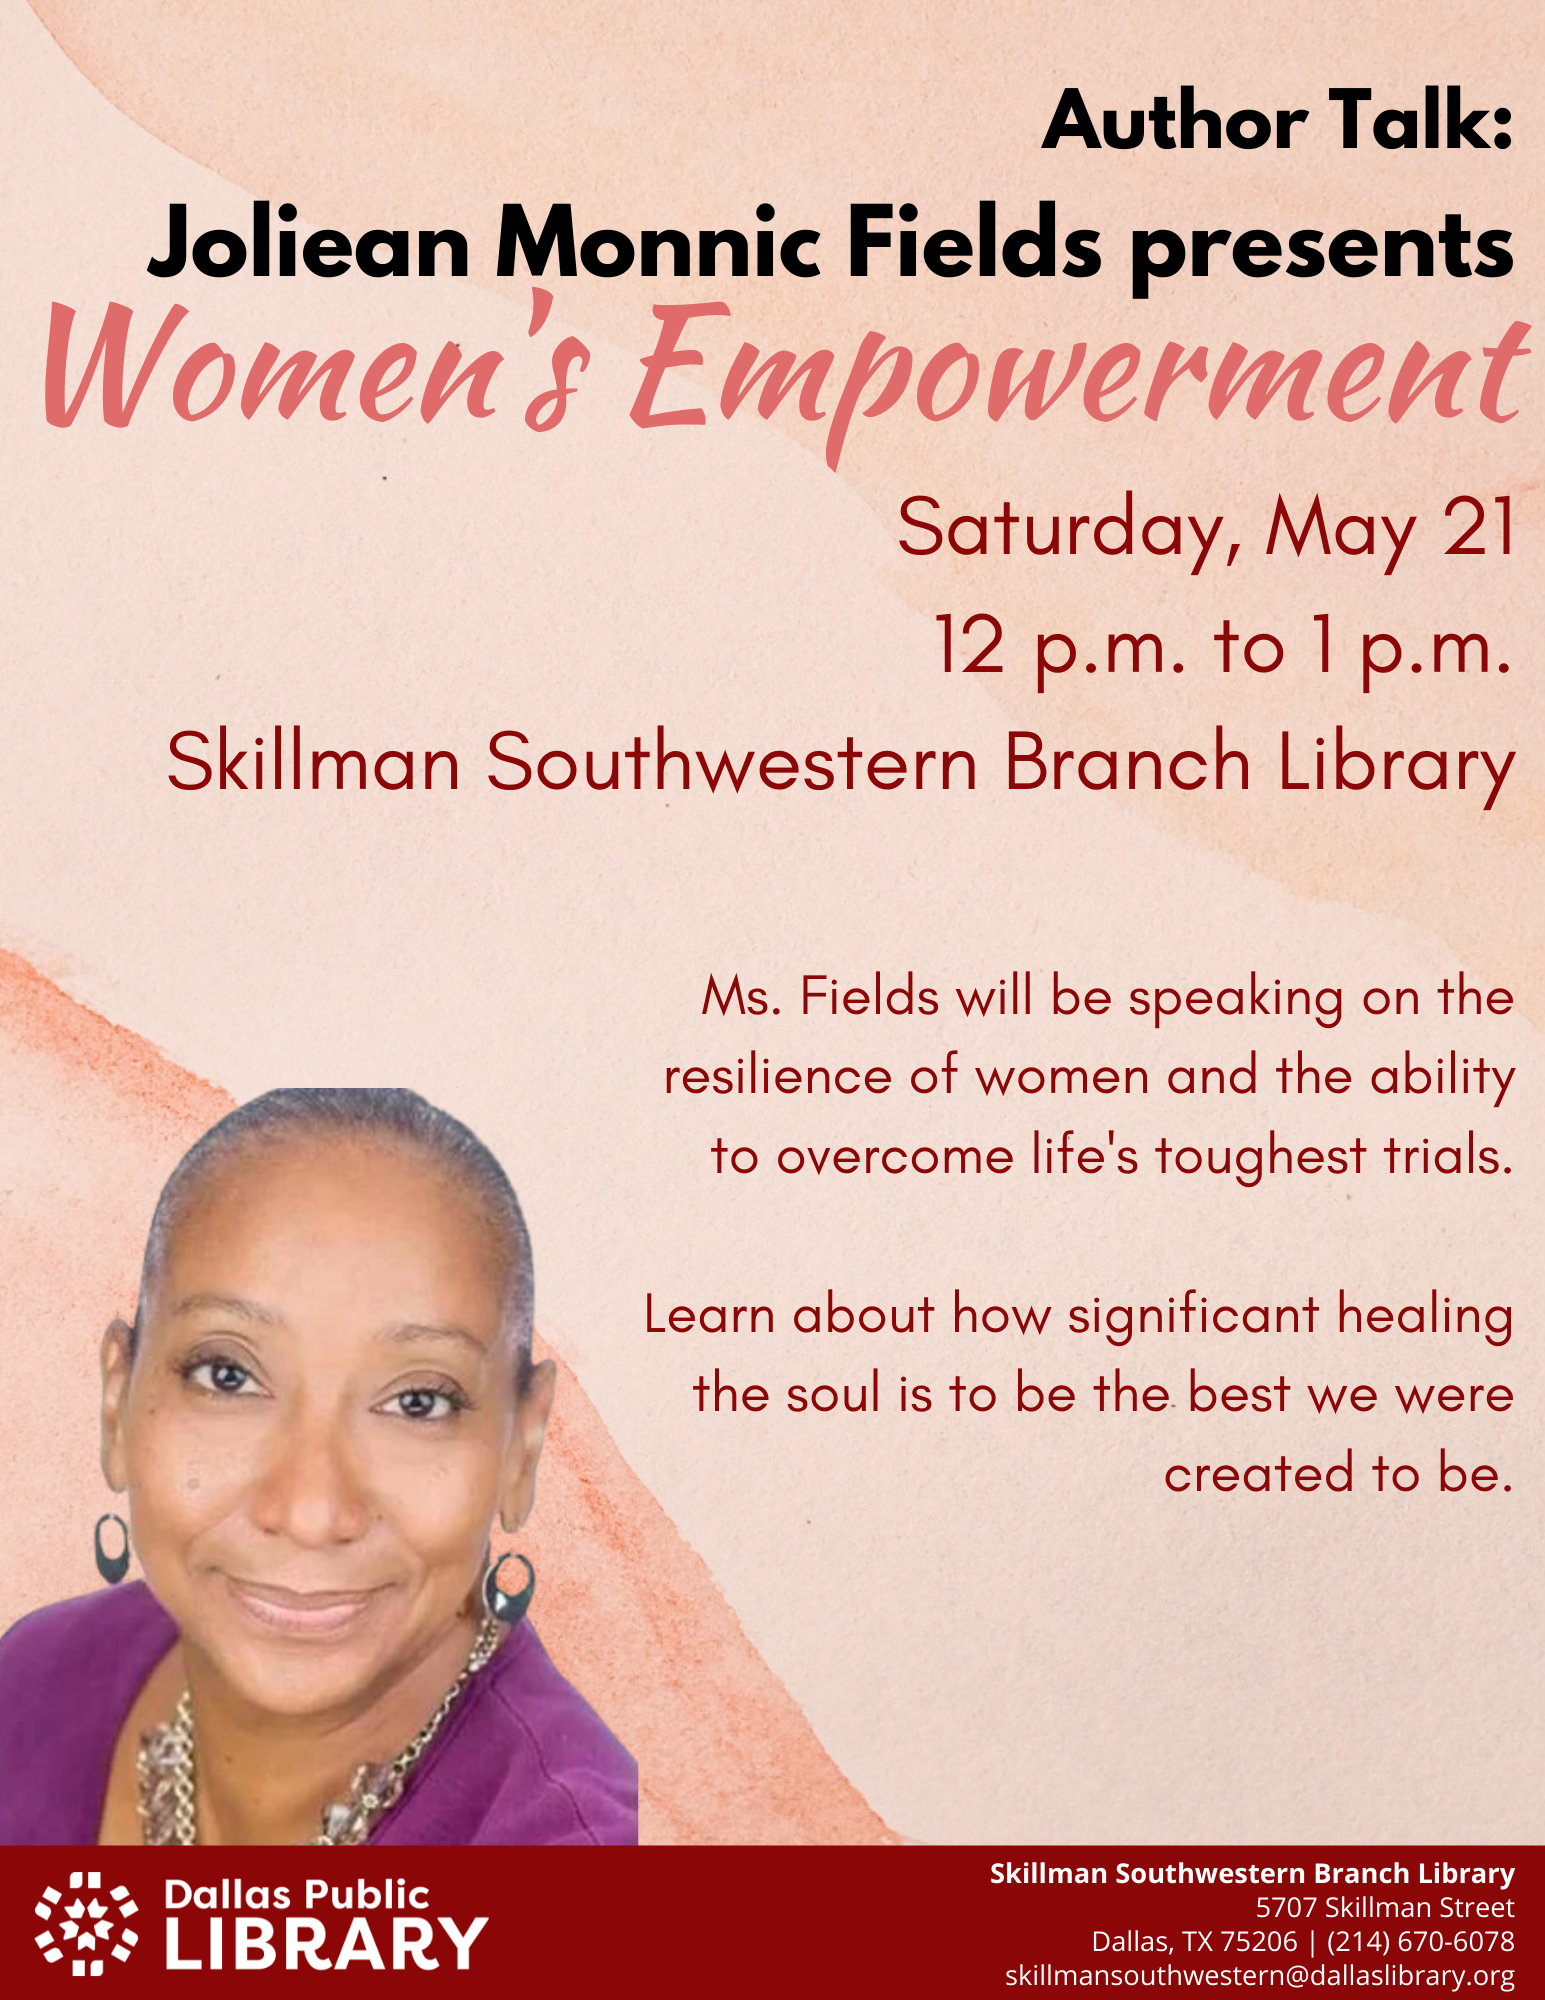 Photo of the speaker, Joliean Monnic Fields and more information about the program.